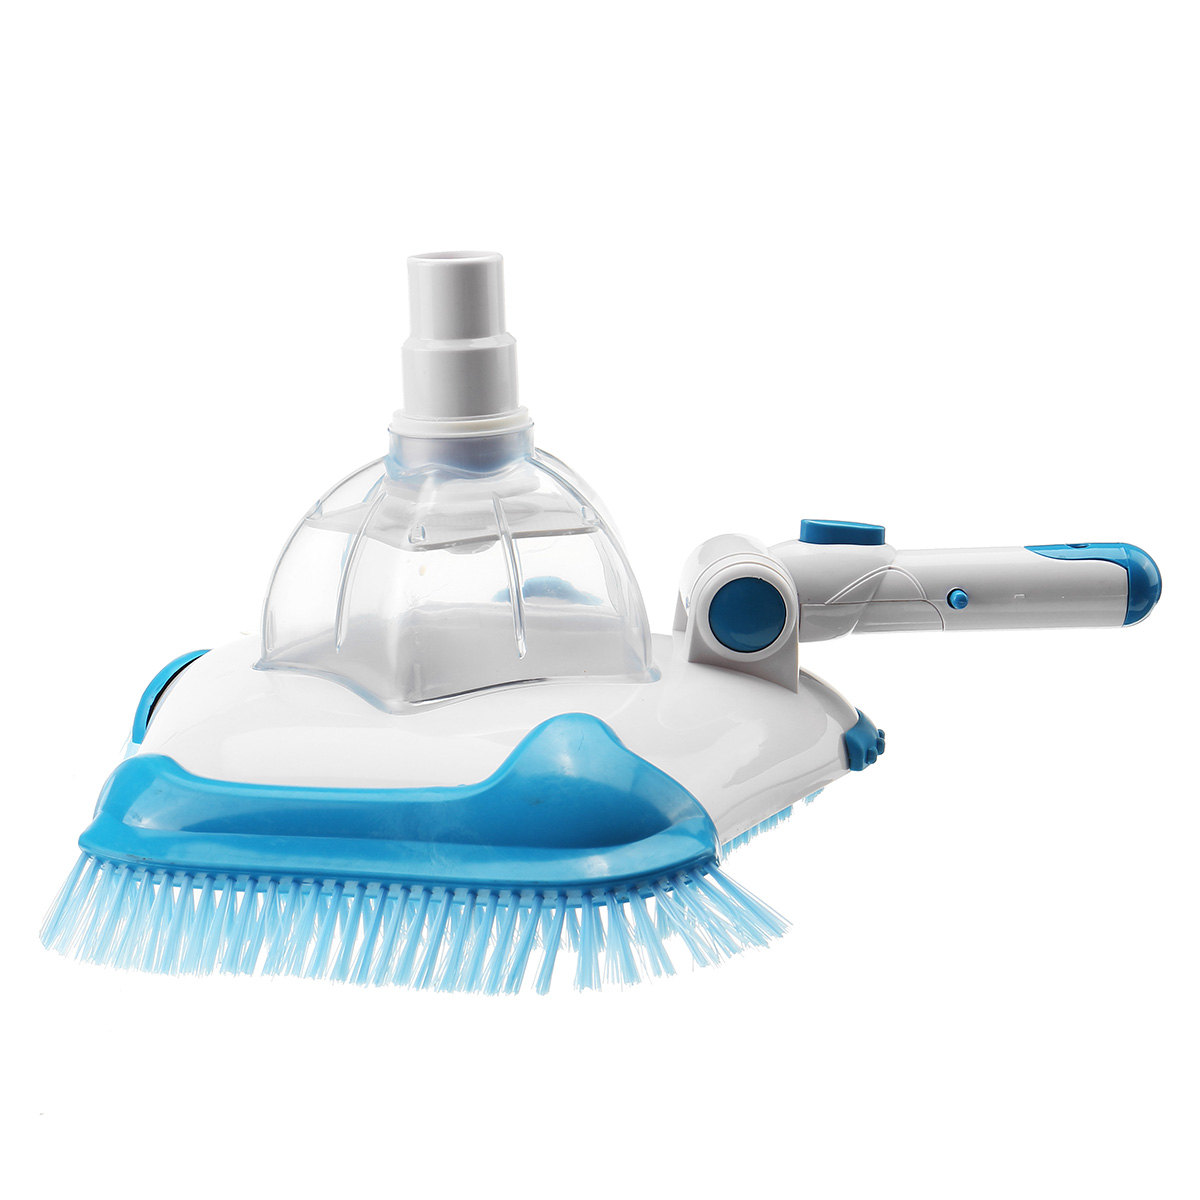 Swimming-Pool-Cleaner-Portable-Swimpool-Vacuum-Brush-Cleaner-Cleaning-Tool-1817263-3